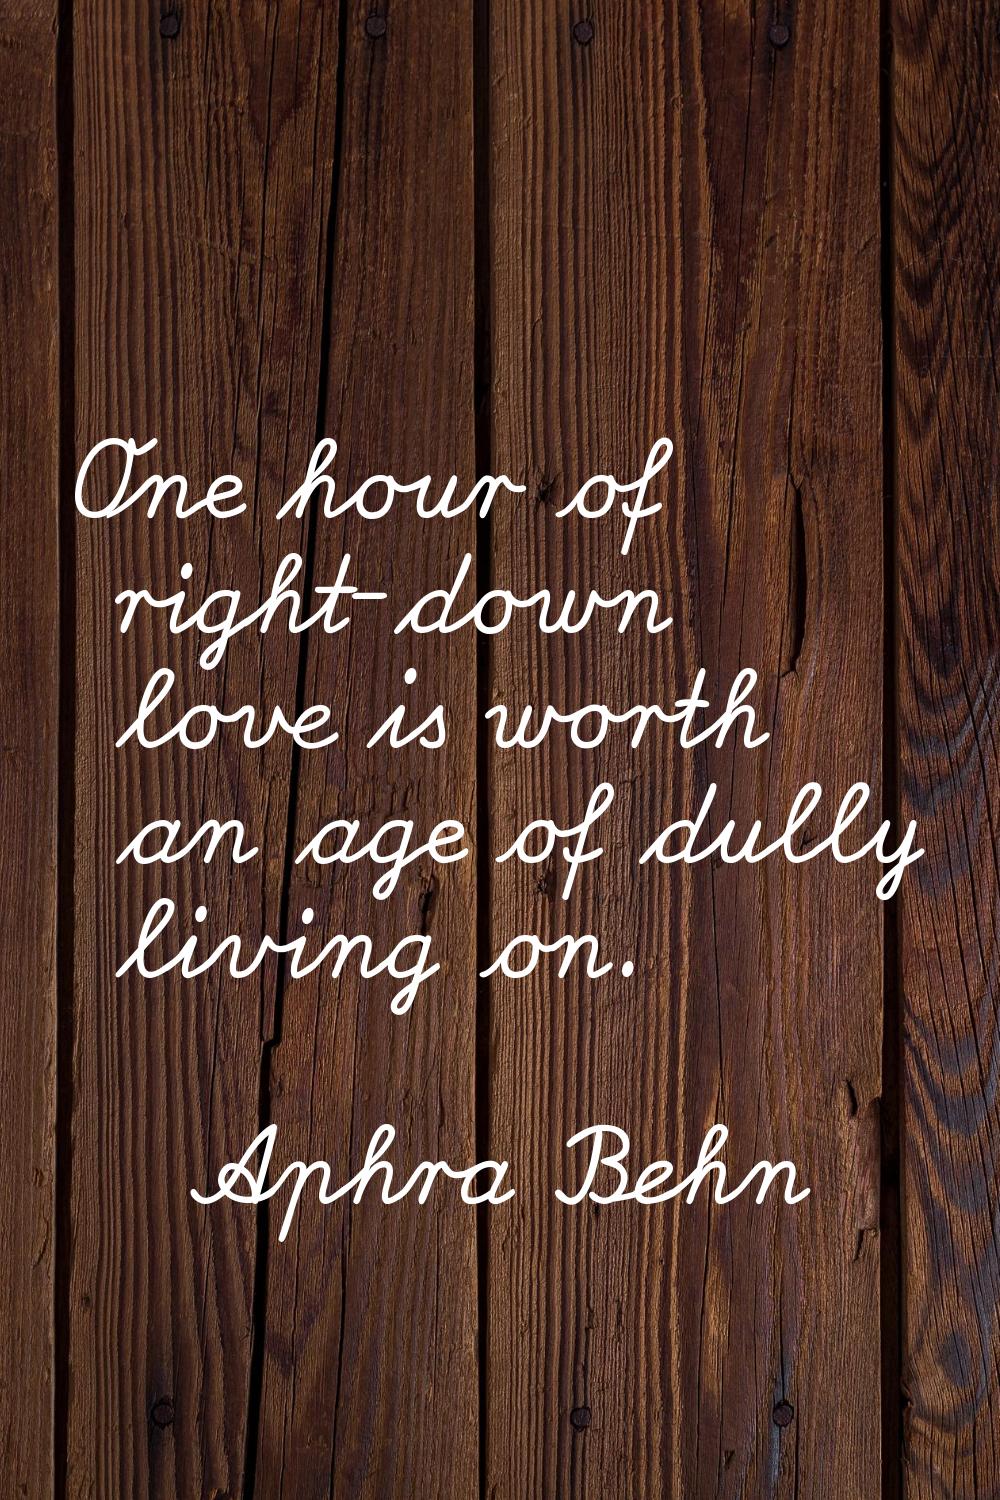 One hour of right-down love is worth an age of dully living on.